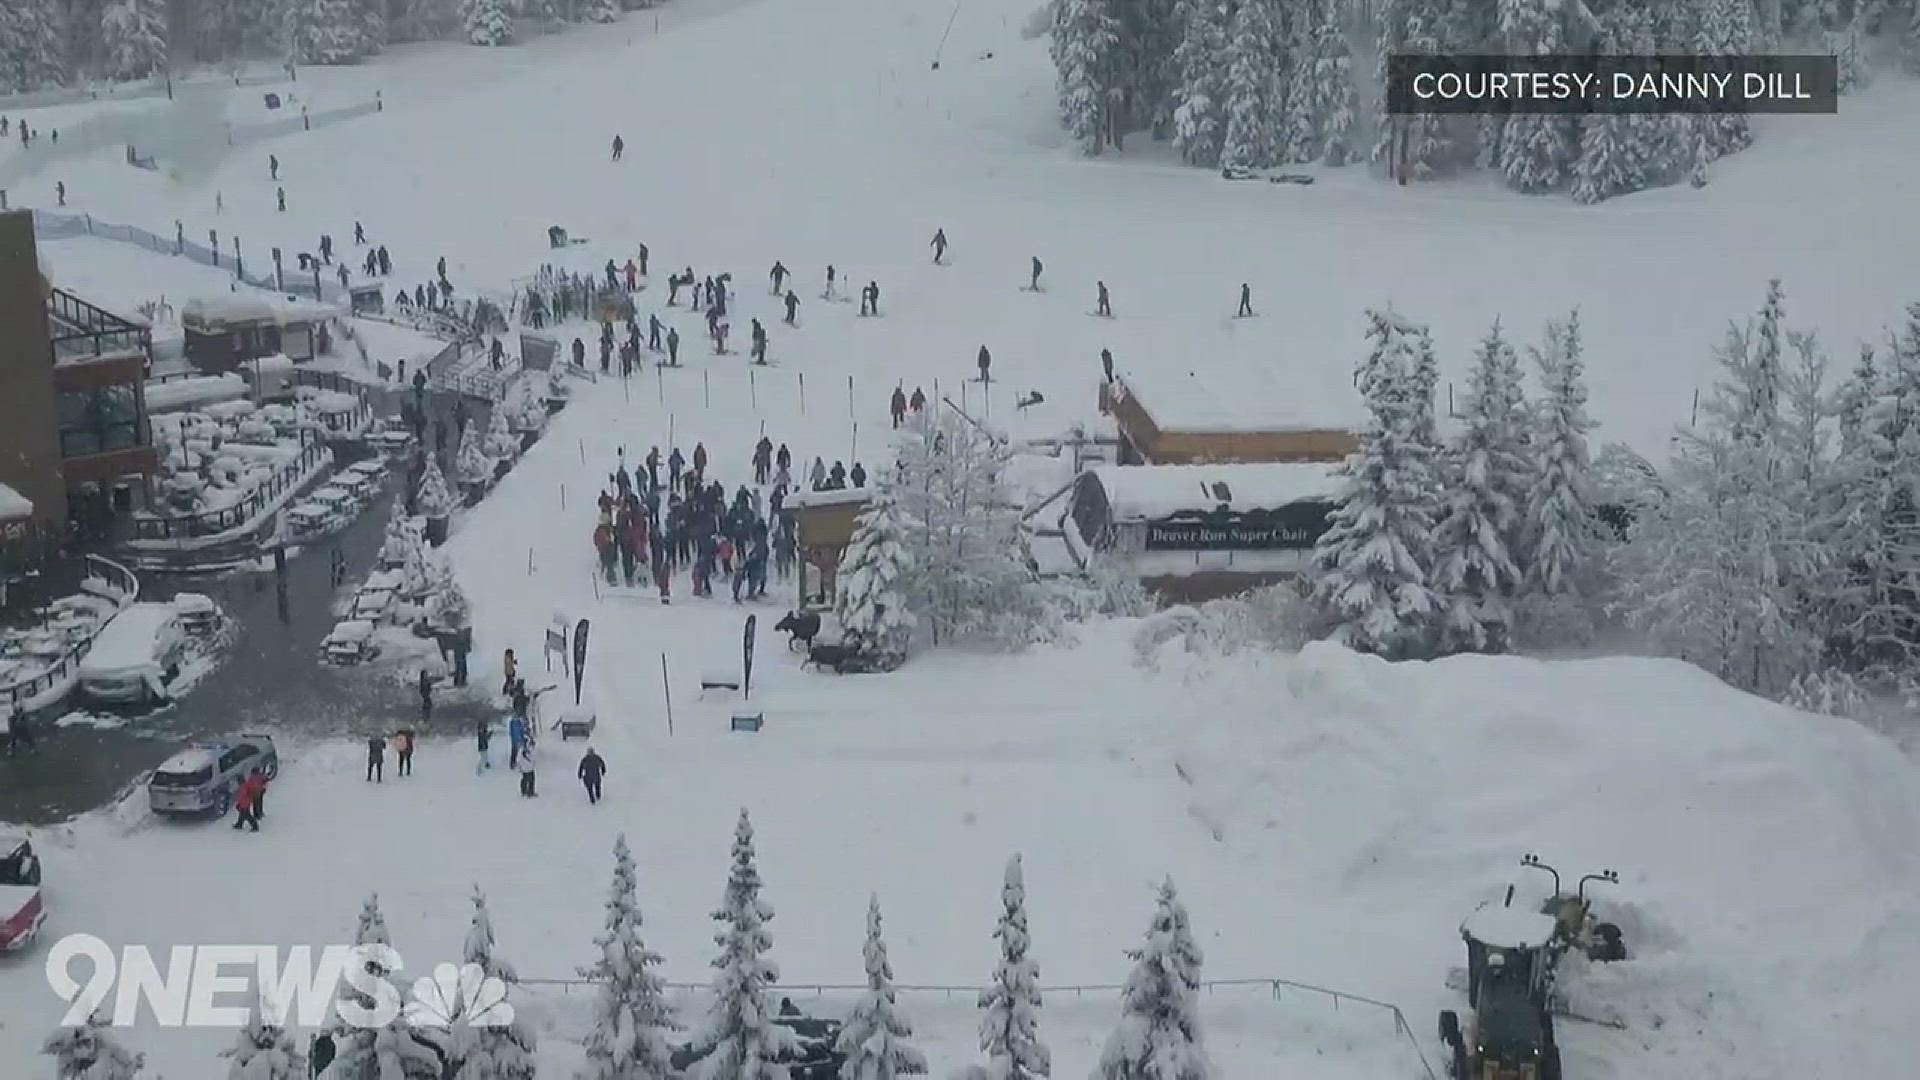 Two moose were caught on camera trotting through a crowd of skiers and snowboarders at the base of a lift at Breckenridge on Thursday. No one was hurt, according to the resort.